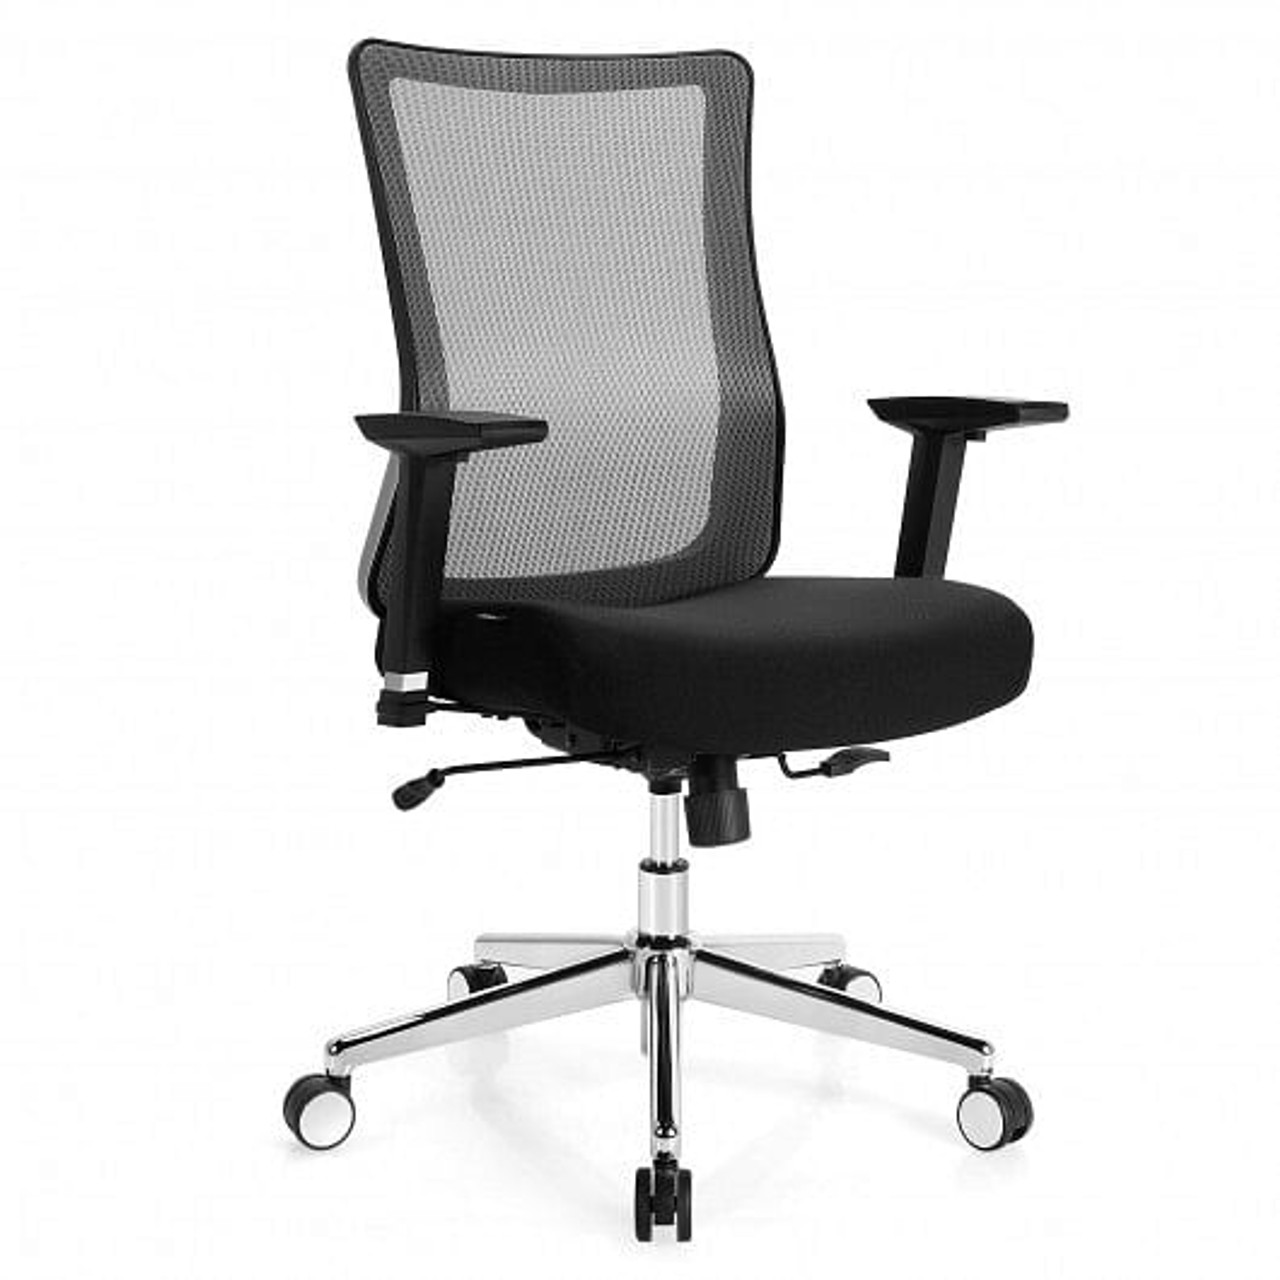 Ergonomic Mesh Office Chair Sliding Seat Height Adjustable with Armrest